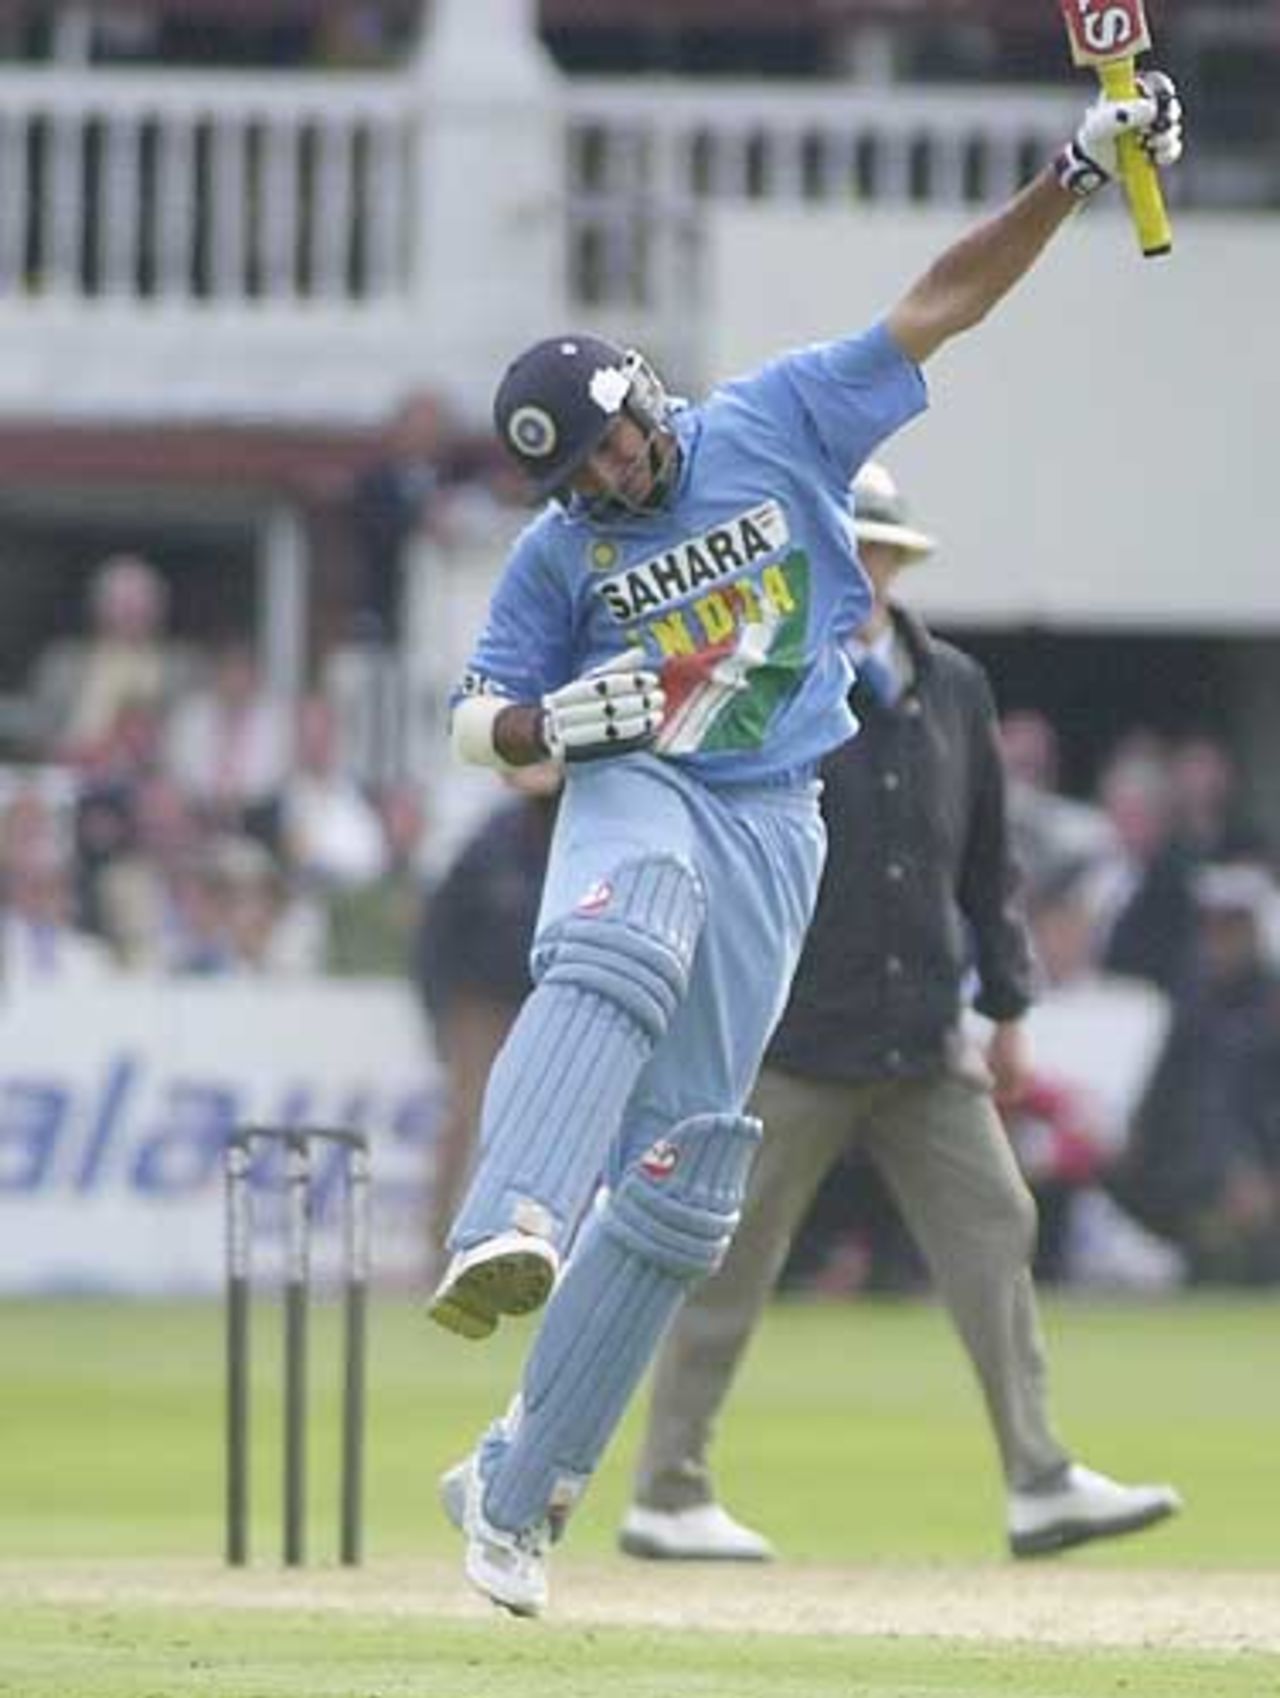 Yuvraj Singh leaps in delight as India win, England v India, NatWest Series, Lord's, Sat 29 Jun